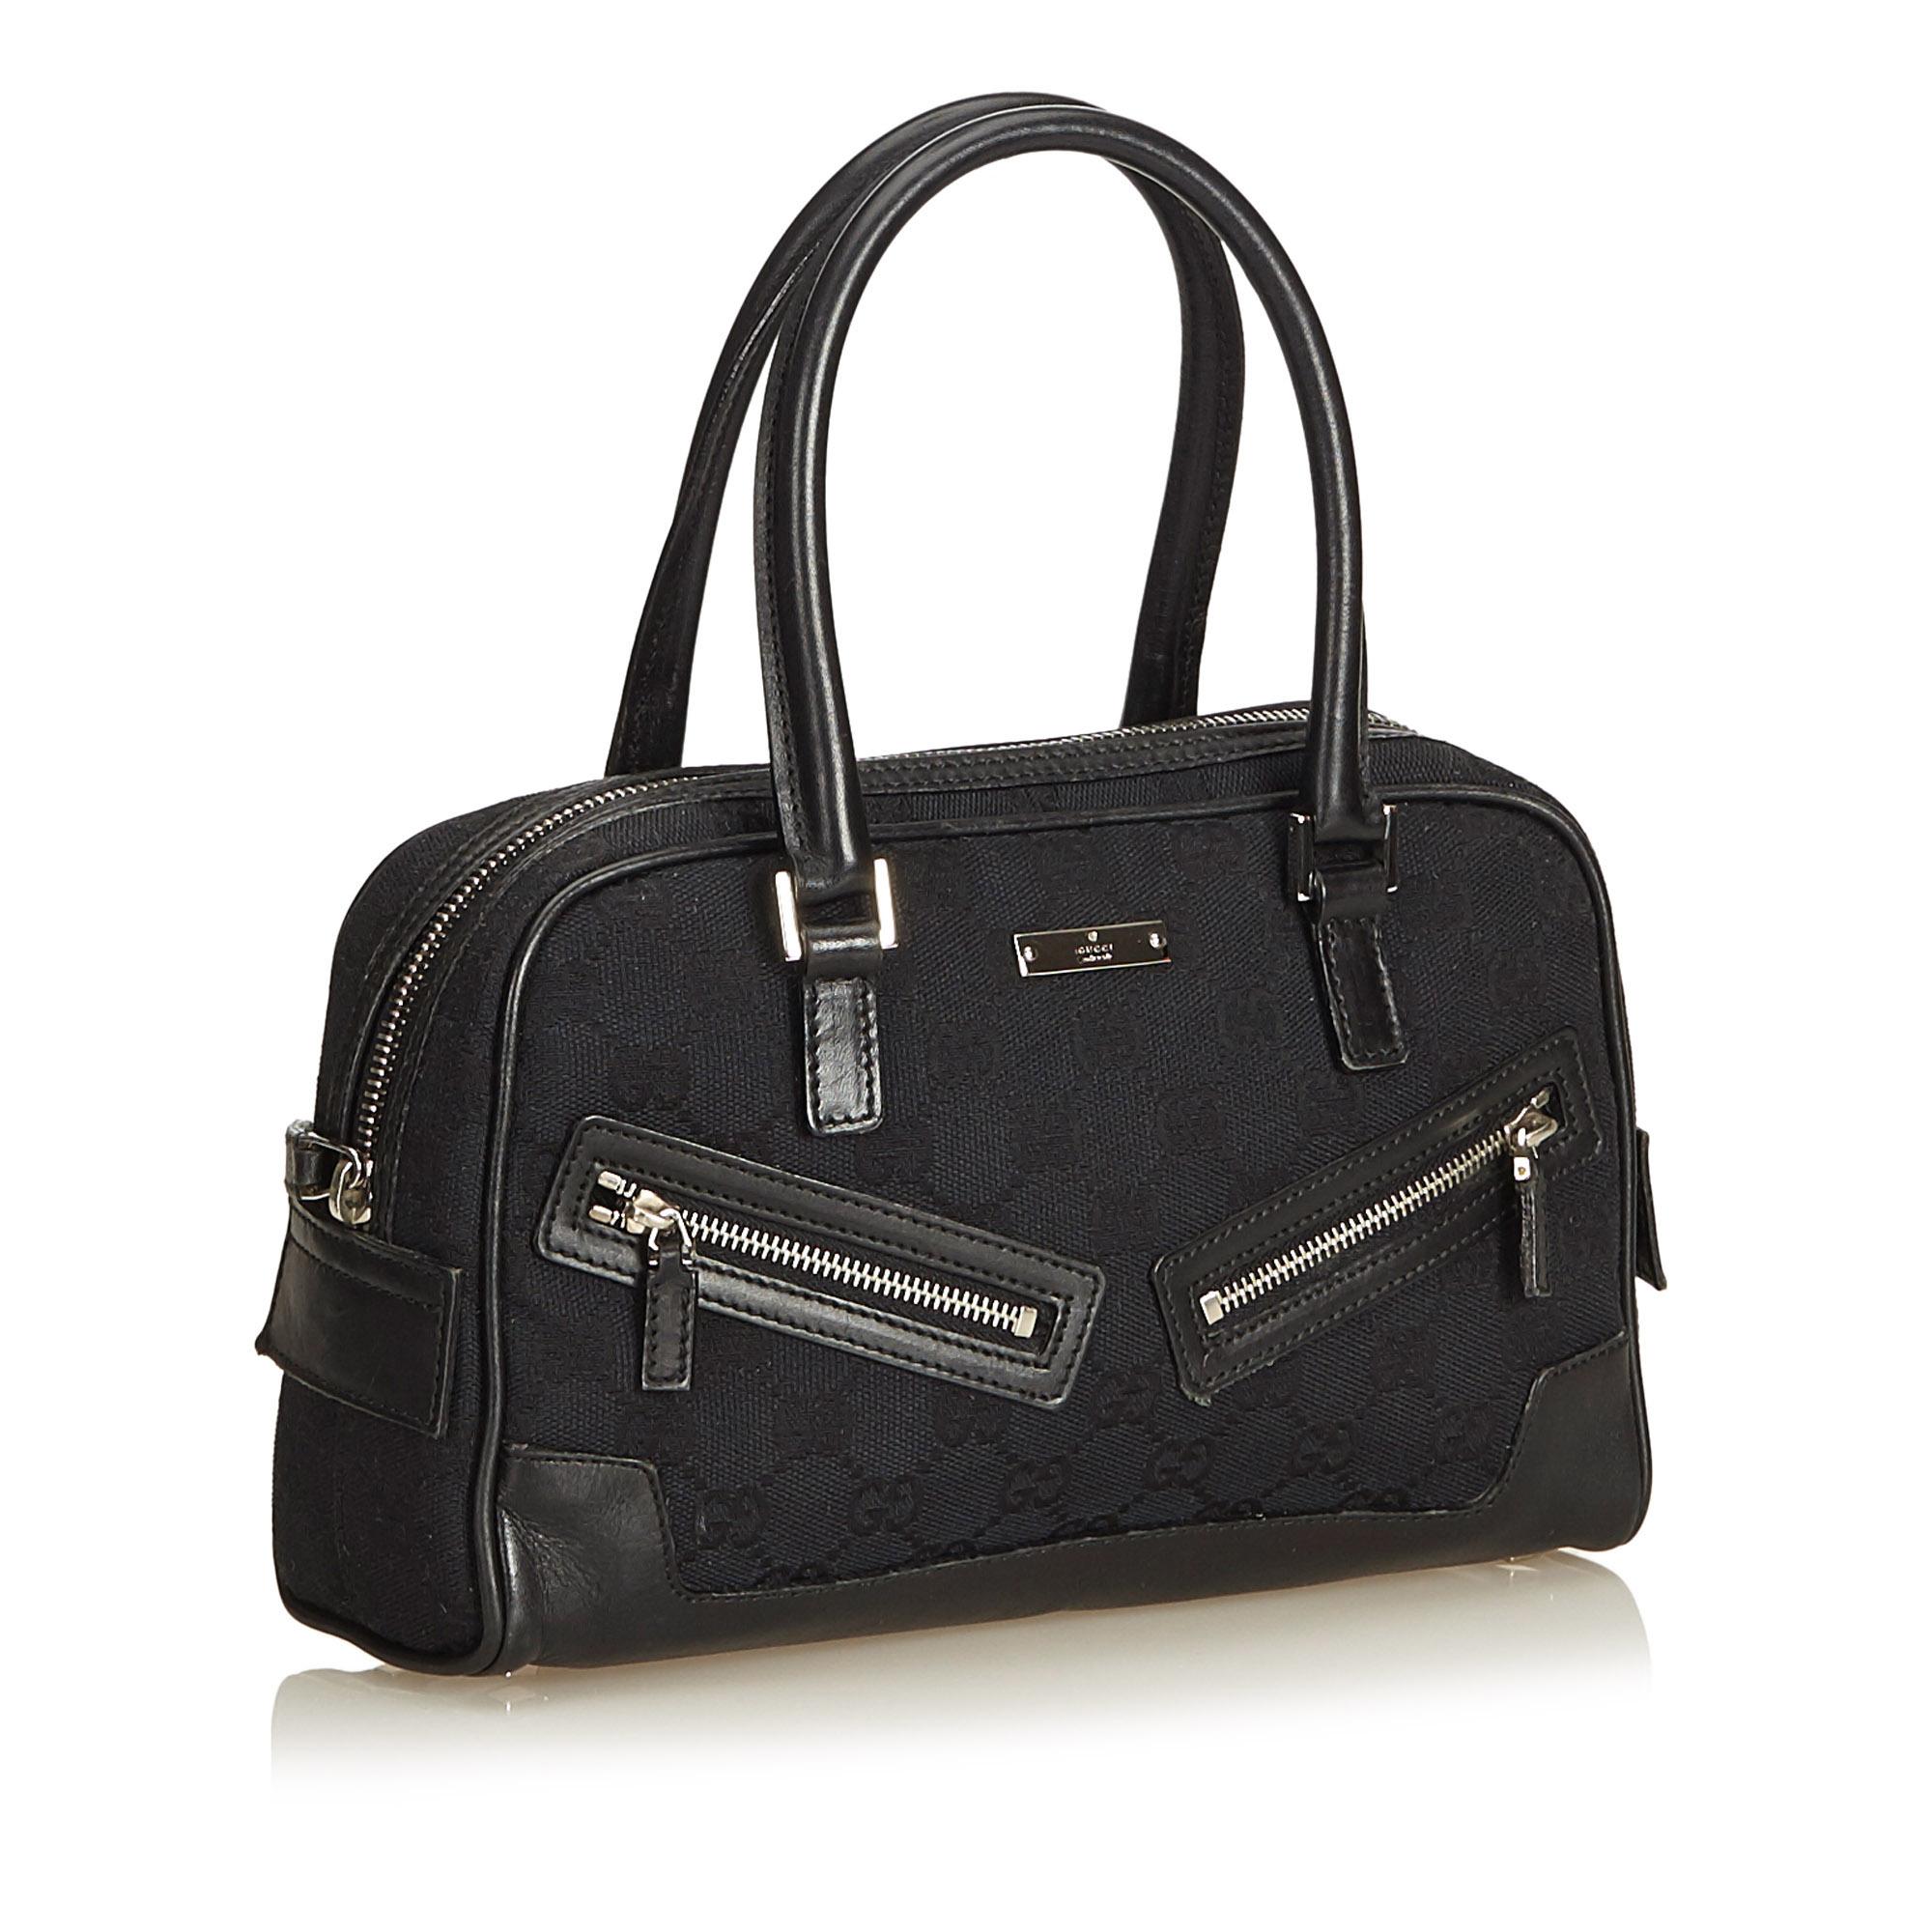 This boston bag features a canvas body with leather trim, rolled leather handles, top zip closure, exterior zip pockets, and interior zip pocket.

It carries a B+ condition rating.

Dimensions: 
Length 16.00 cm
Width 23.00 cm
Depth 7.00 cm
Shoulder